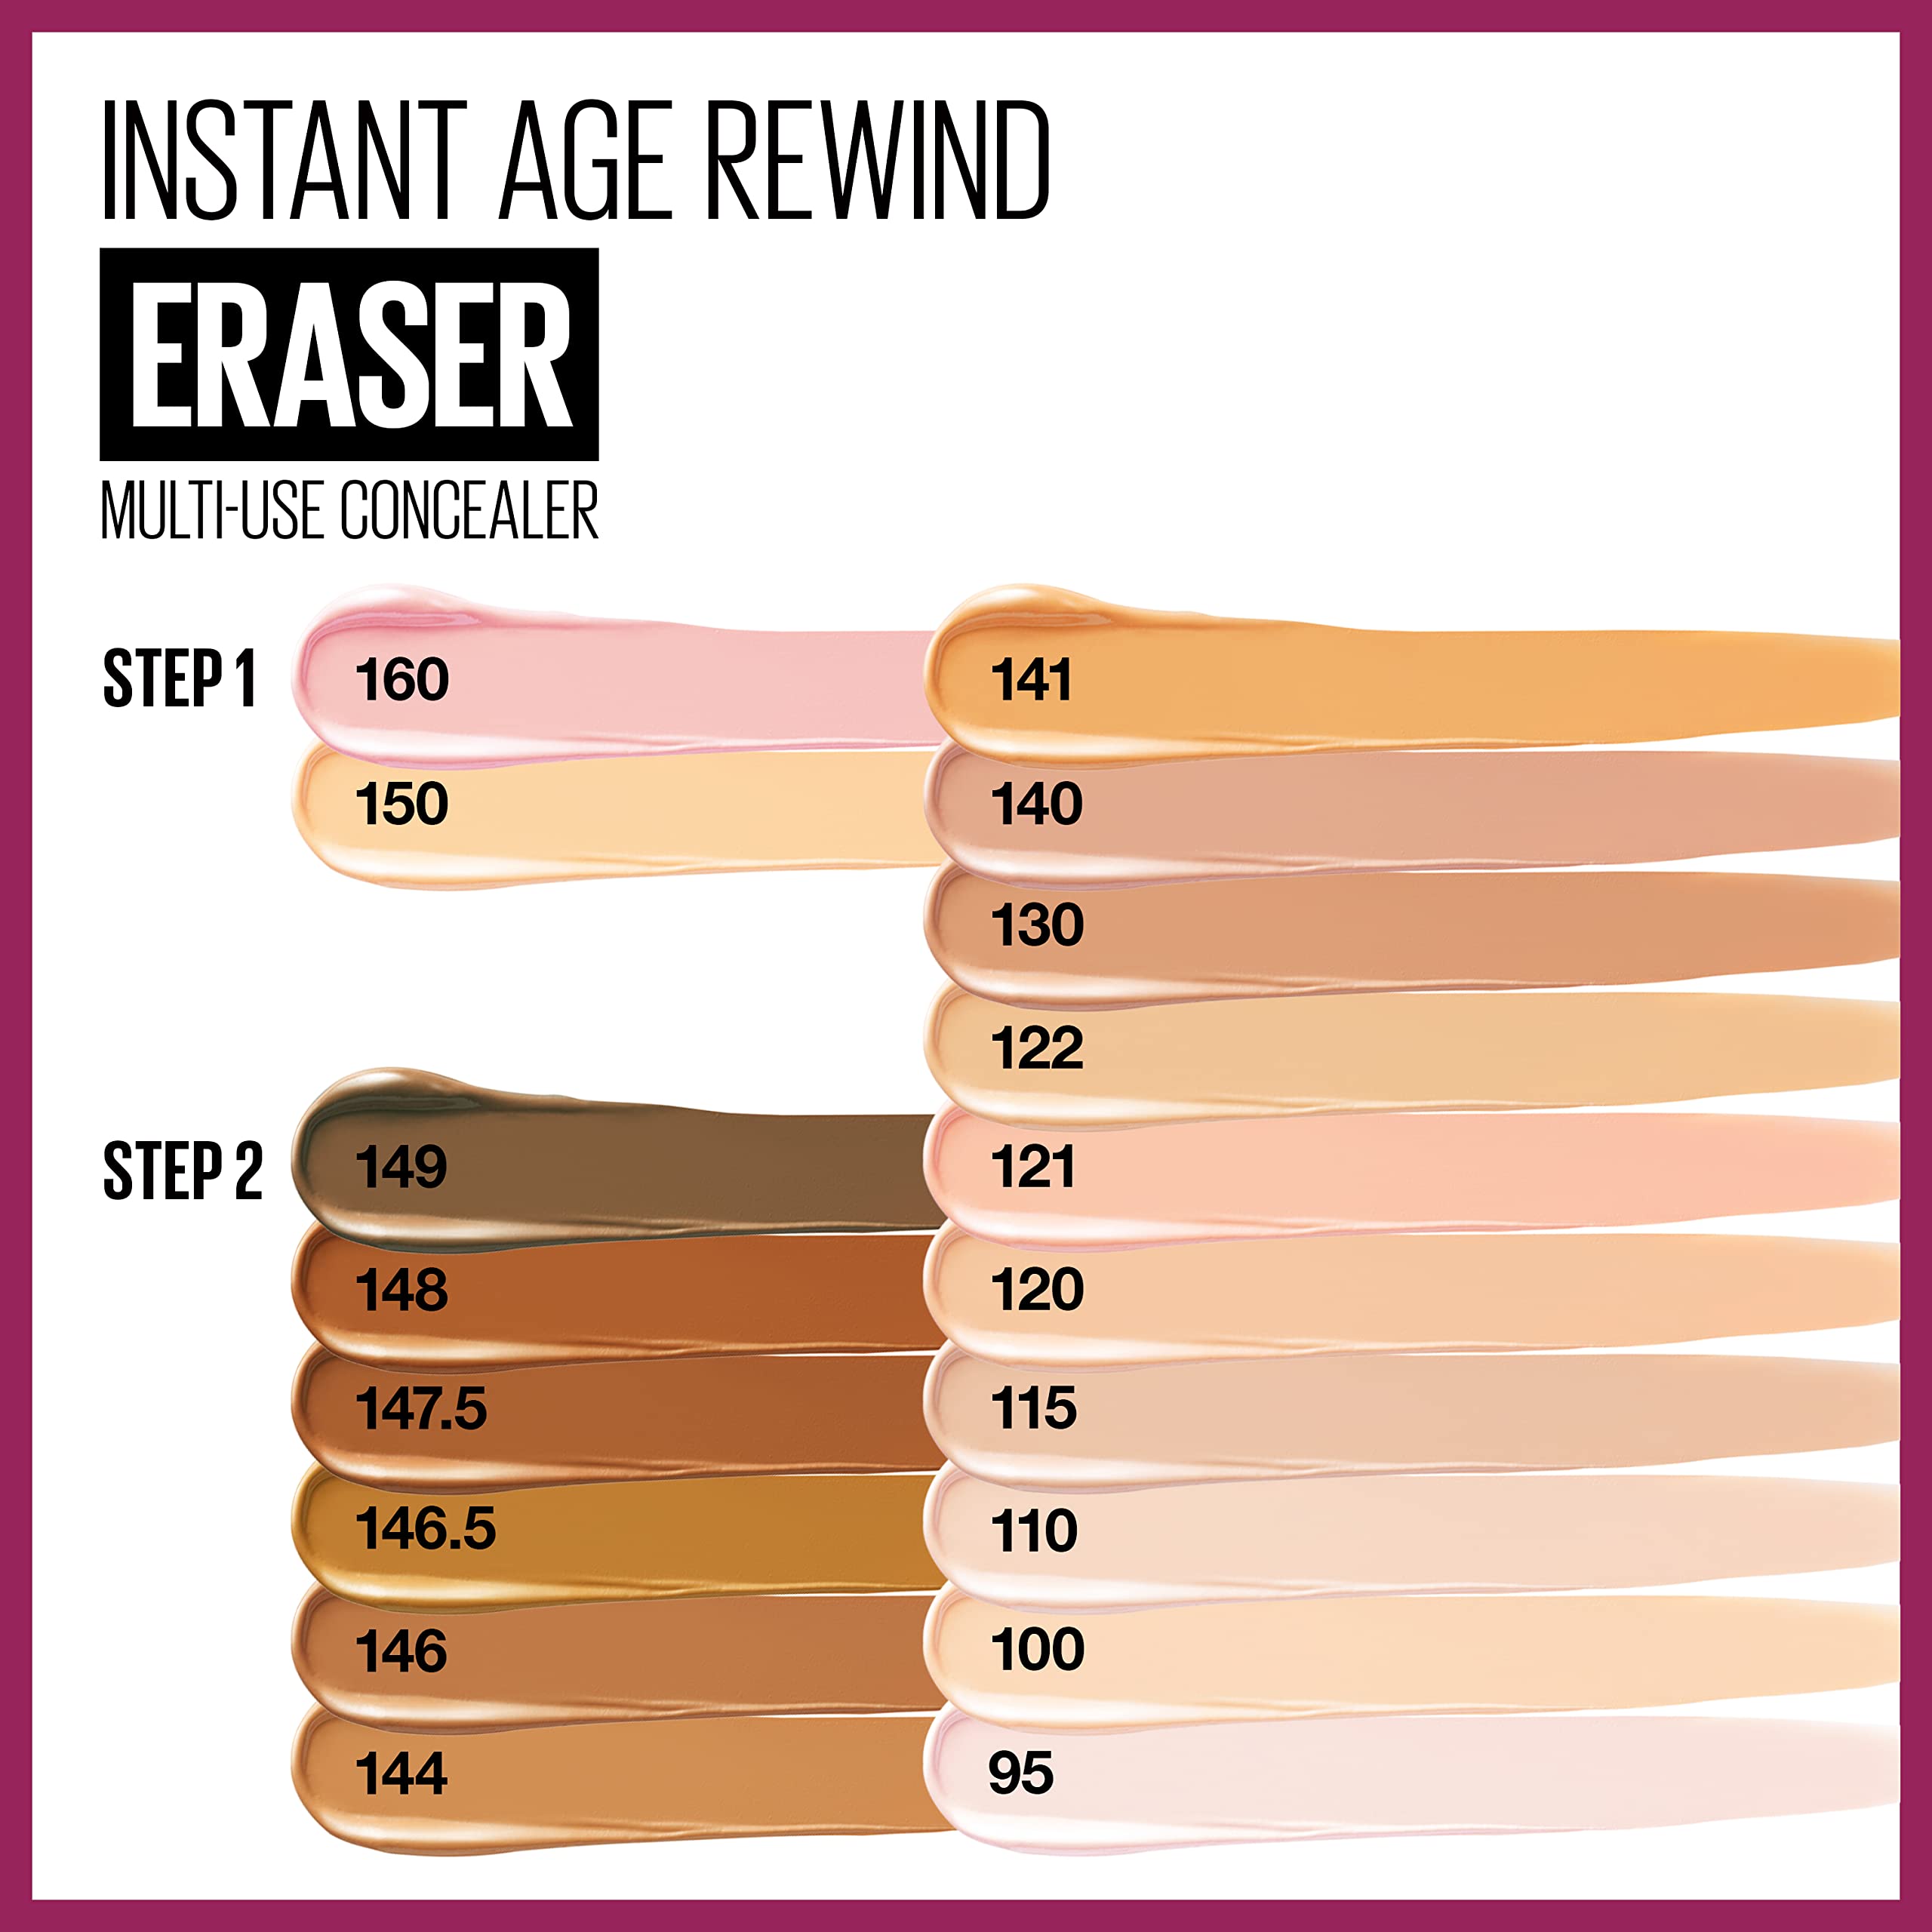 Maybelline New York Instant Age Rewind Eraser Dark Circles Treatment Multi-Use Concealer, 160, 1 Count (Packaging May Vary)